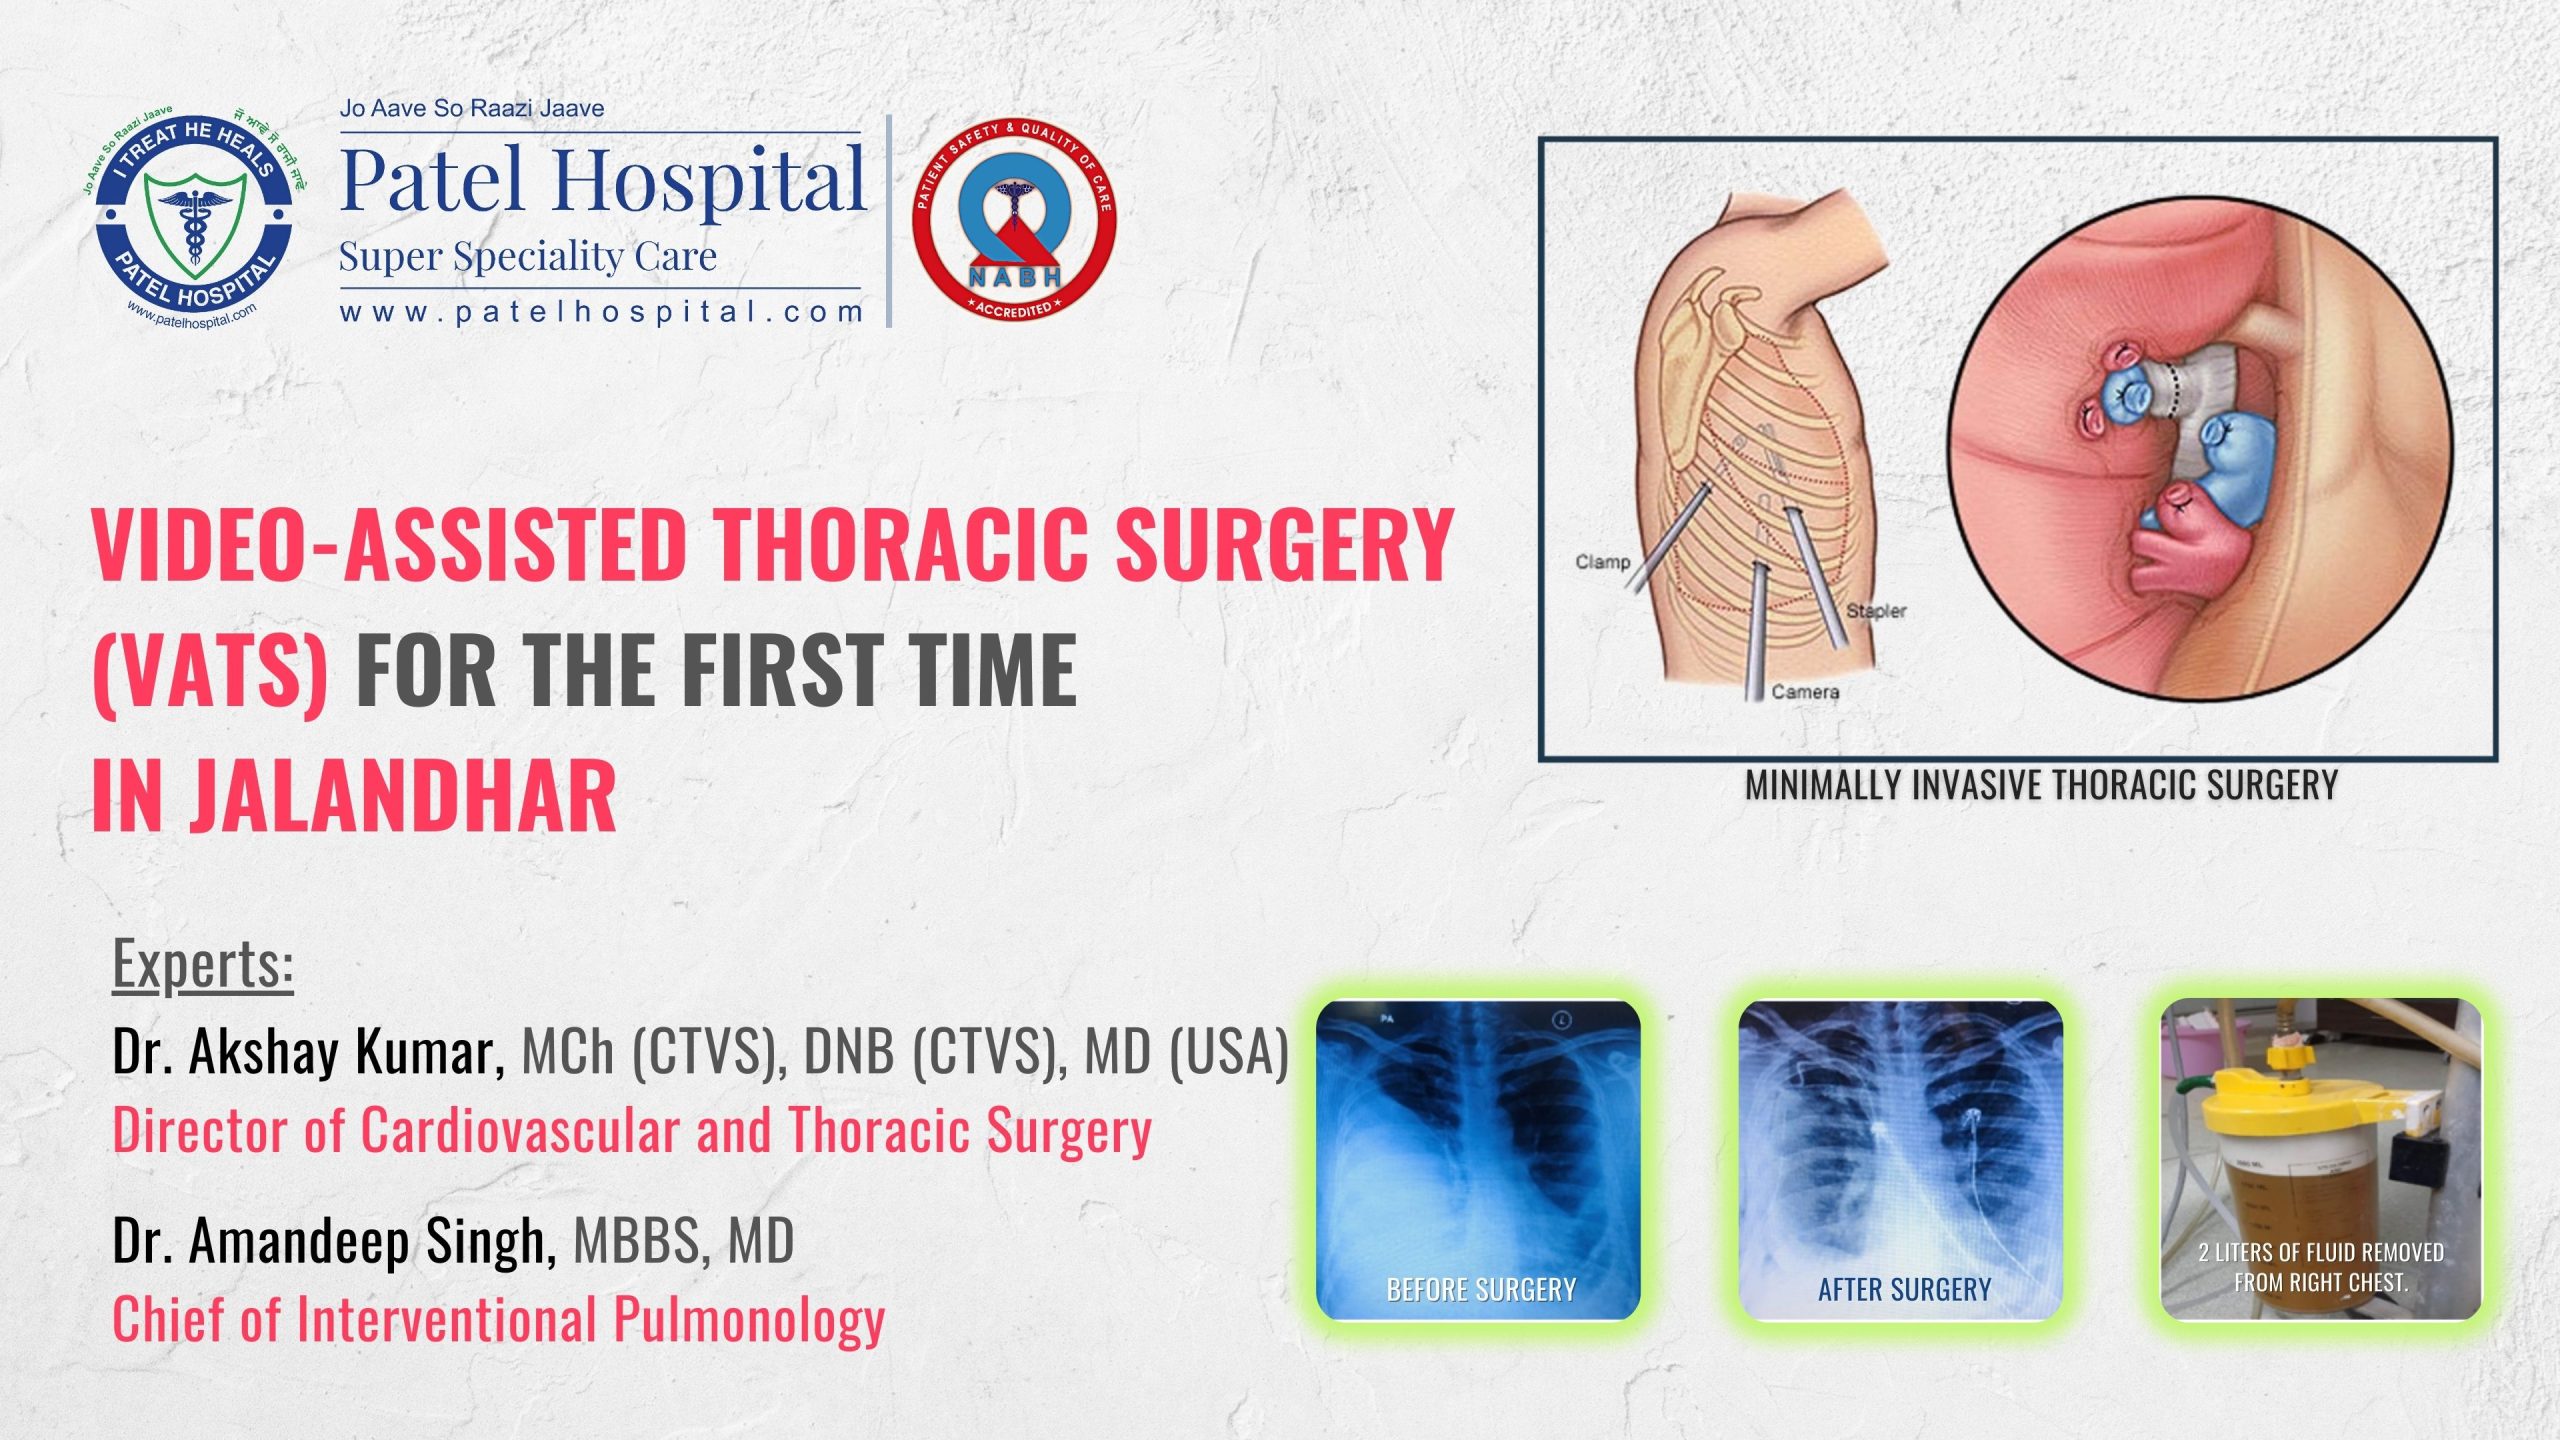 Scarless Lung Surgery for the first time in Jalandhar, Punjab